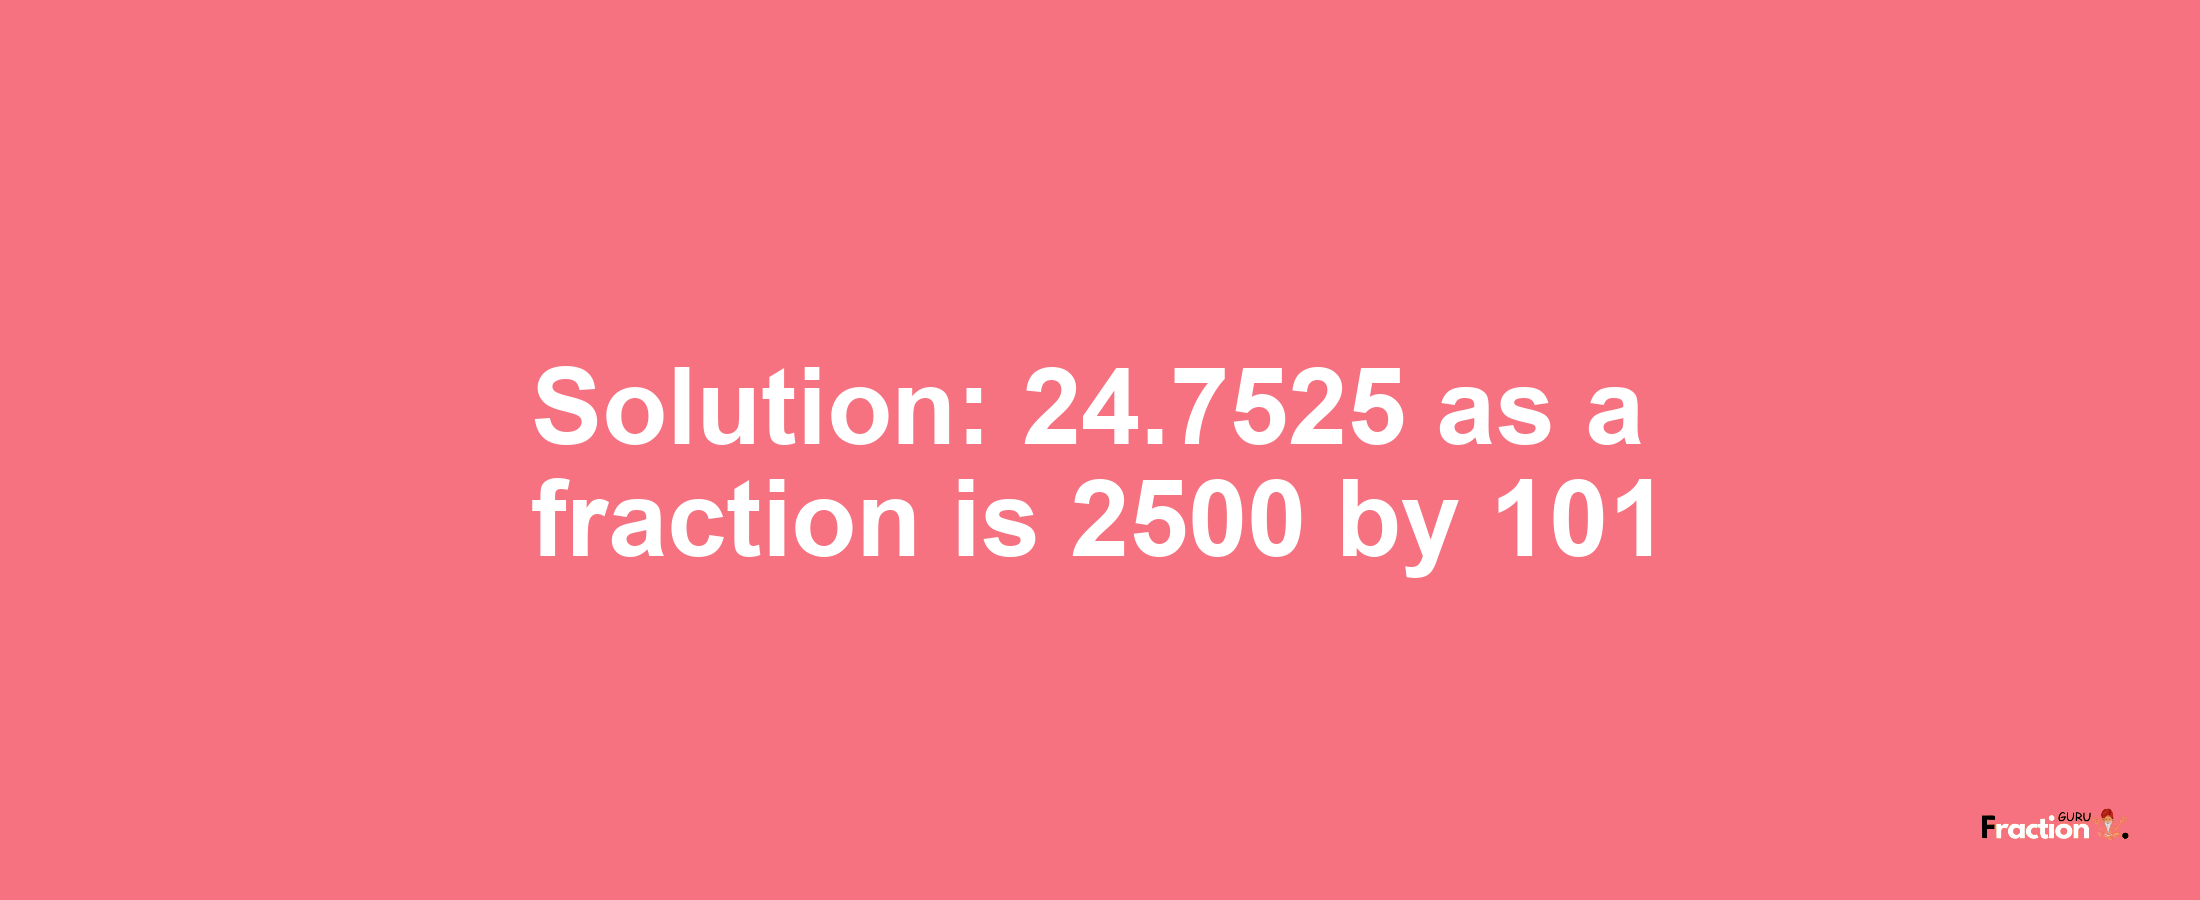 Solution:24.7525 as a fraction is 2500/101